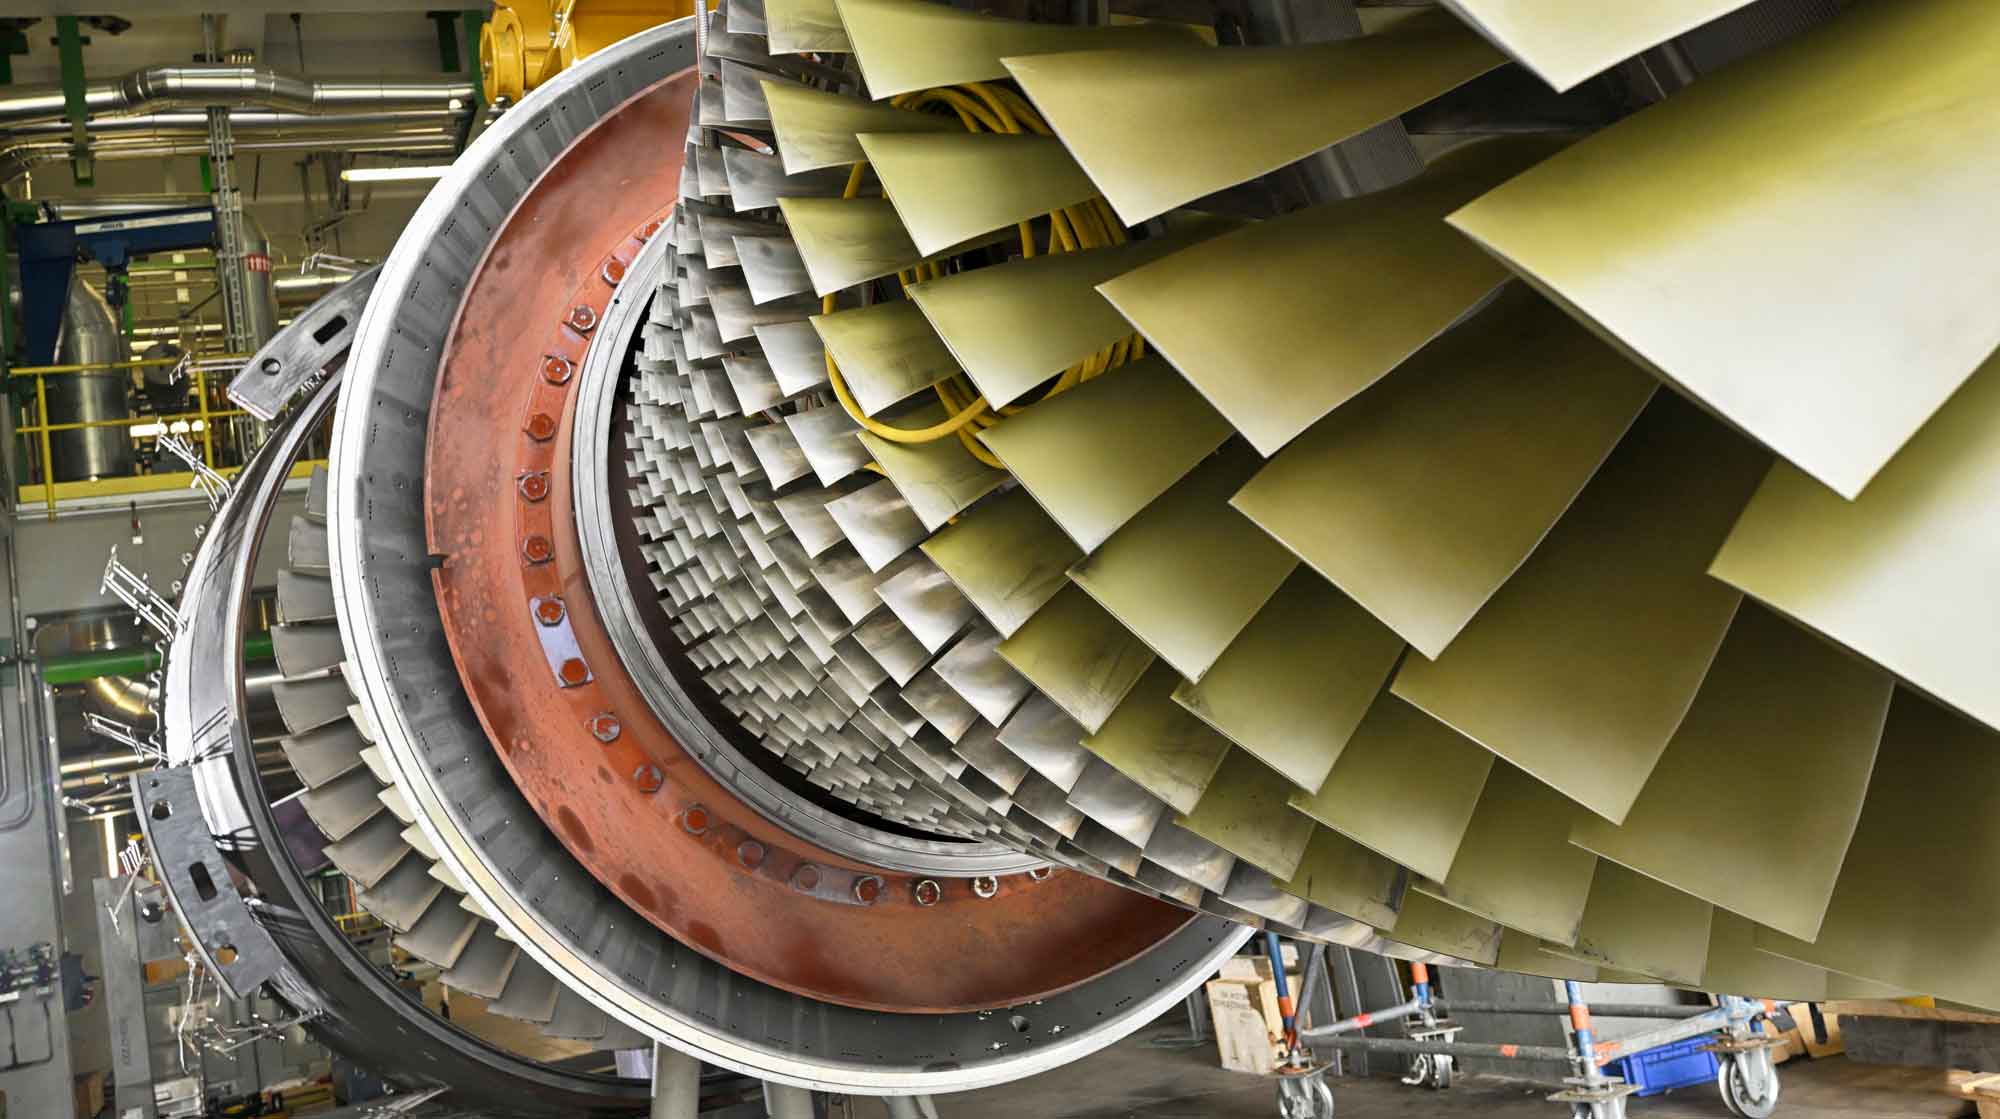 Gas turbine at the Donaustadt power plant site, home to the first-ever trial of cofiring hydrogen for energy generation, Photo: Wien Energie/Johannes Zinner